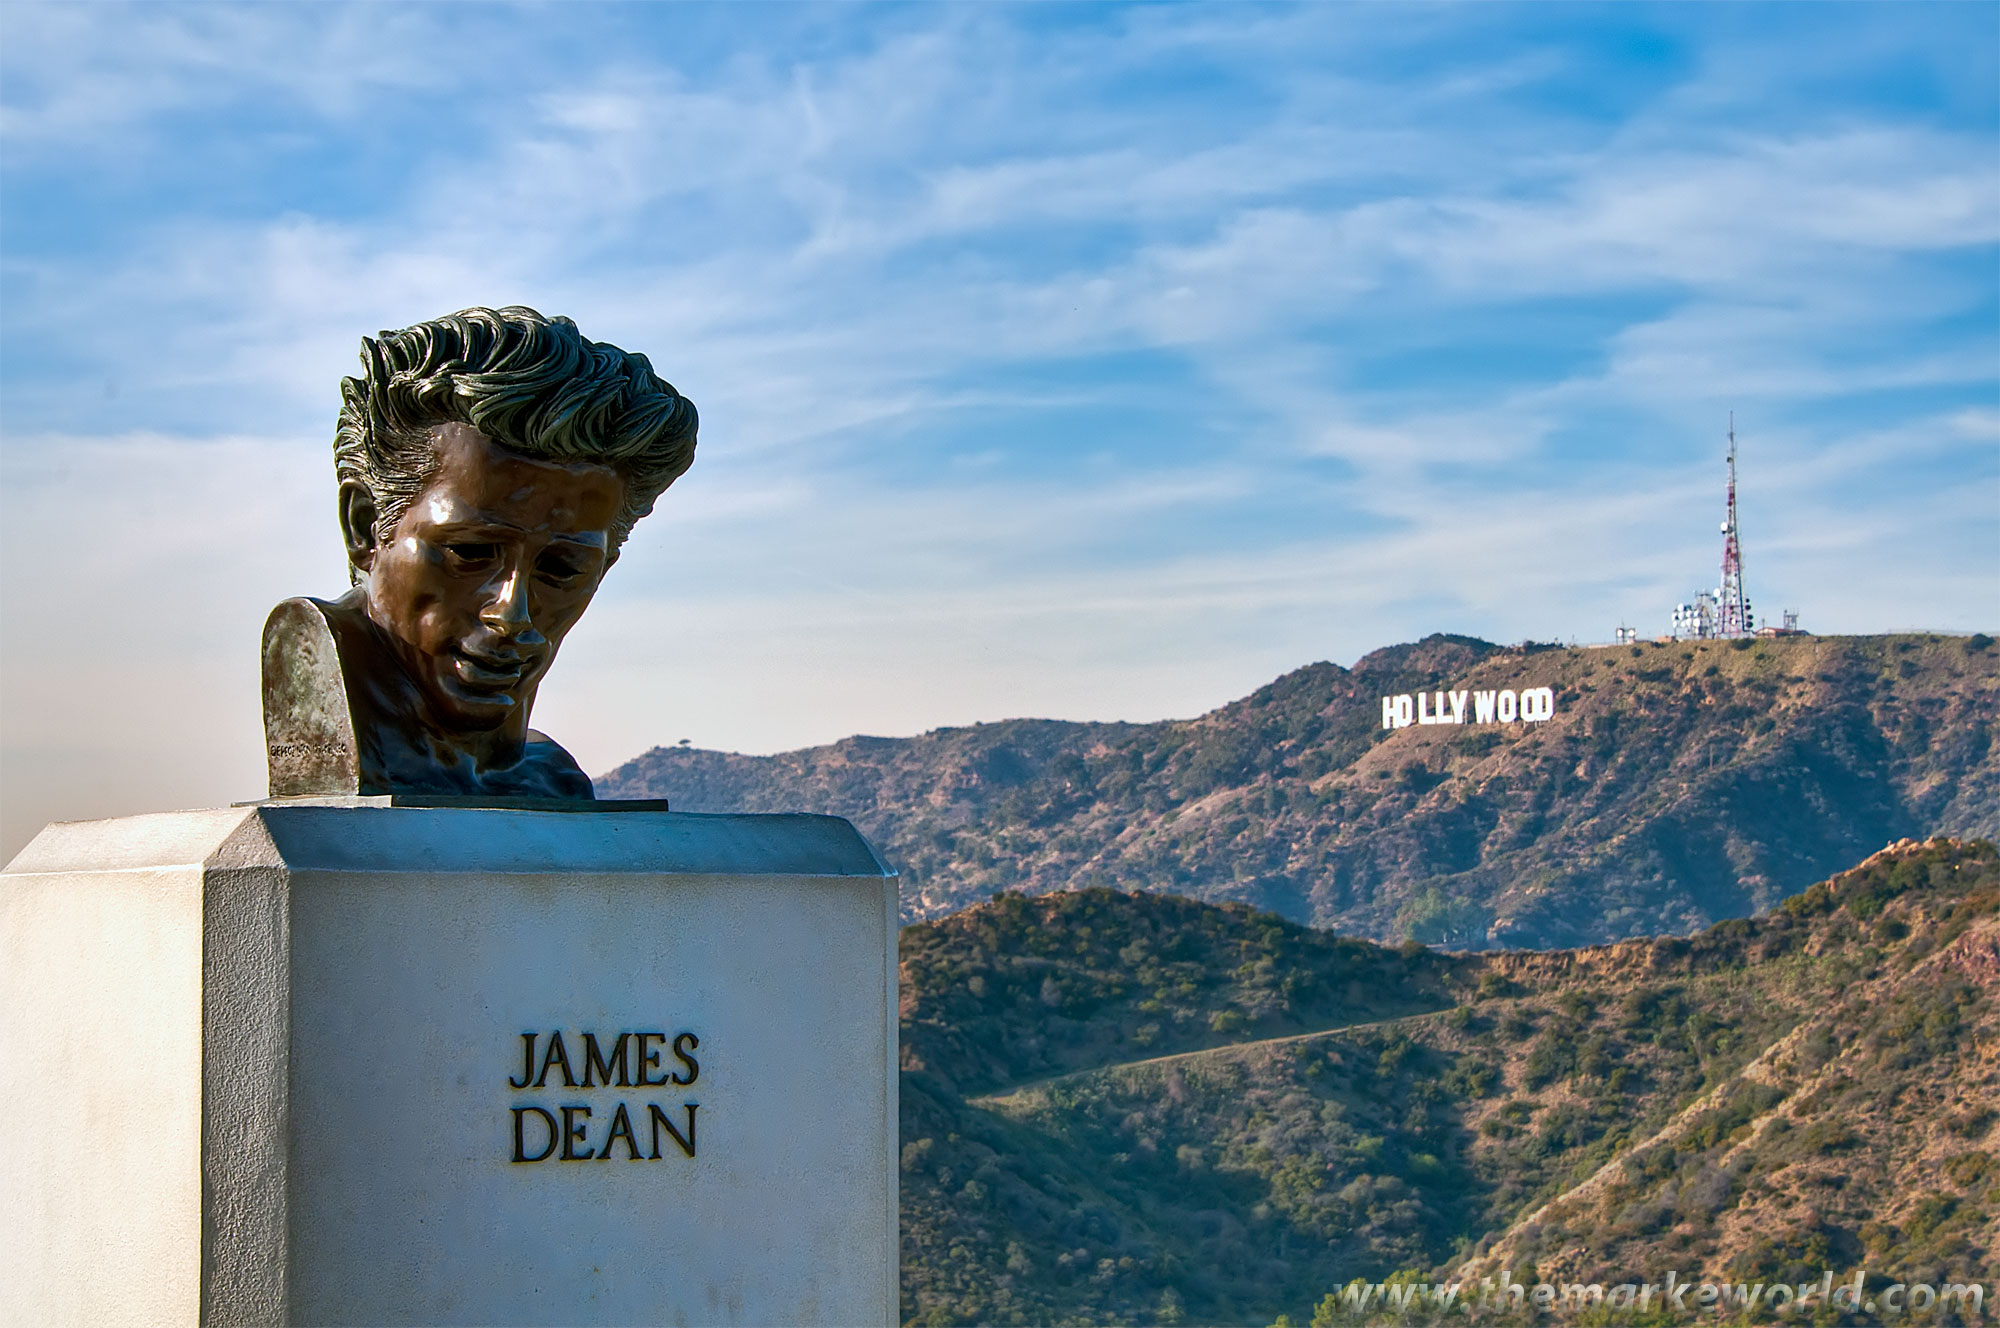 James Dean sculpture at Griffith Observatory